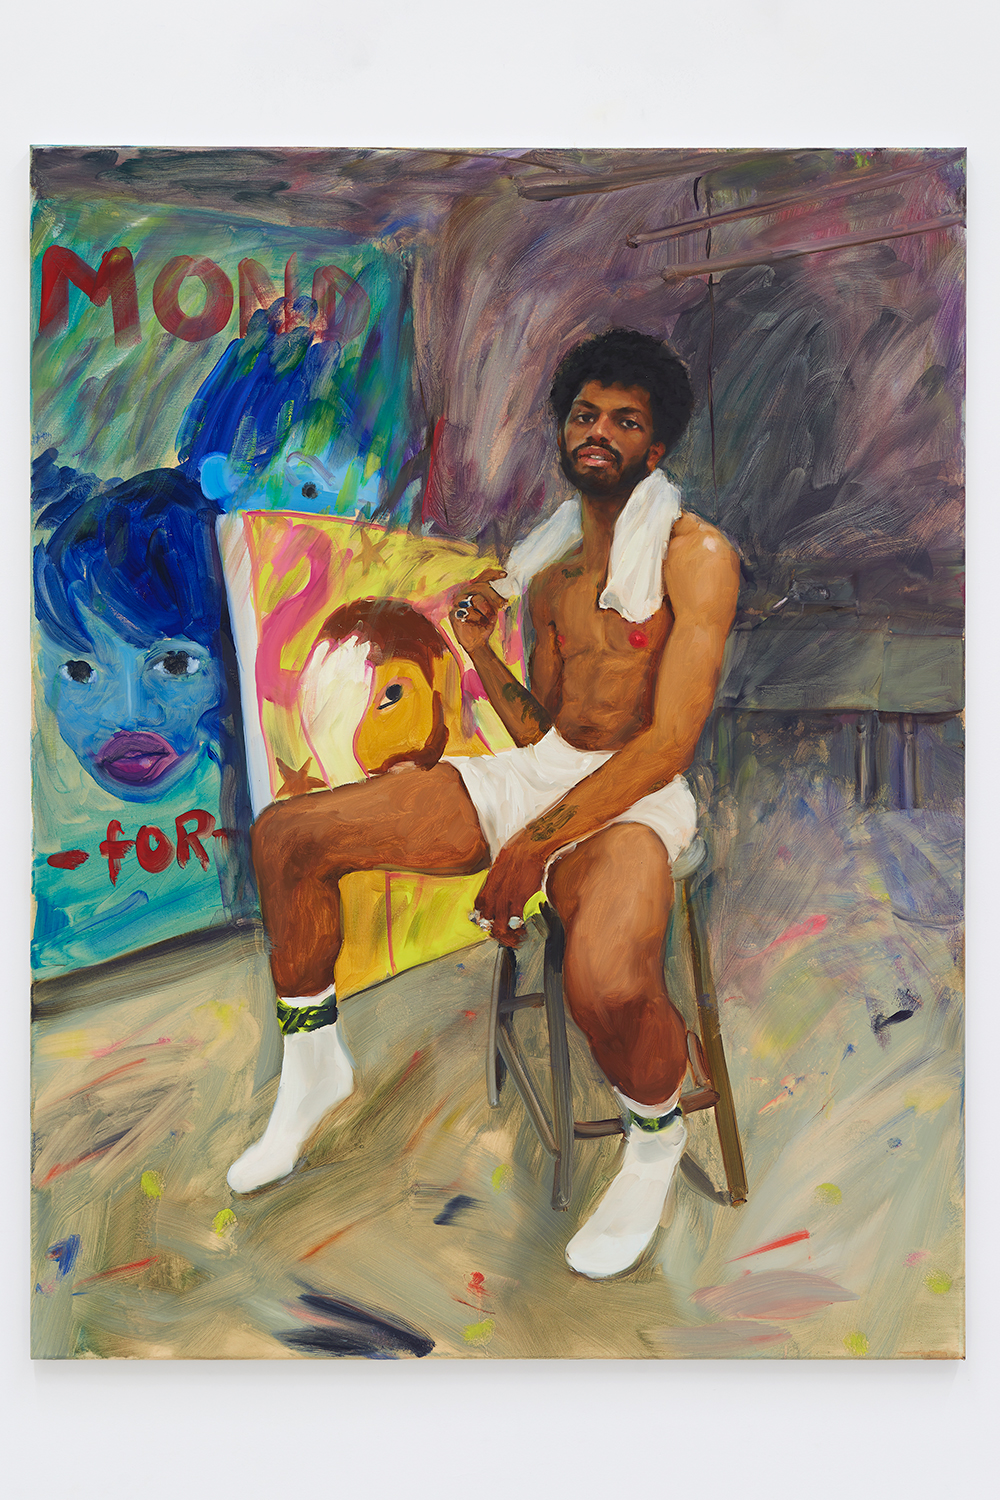 An oil painting of a Black figure in white tube socks and white athletic or boxer shorts. They are perched, legs open, on a stool, and looking at the viewer with lips open slightly. They have a short afro and beard, and are wearing multiple rings on their fingers; one hand holds a short towel around their neck. We can see tattoos or paint stains on their two forearms. The floor is paint-stained, and in the background are two large-scale paintings, in bright colors, with Black figures, obscured text, and a flamingo painted on them.